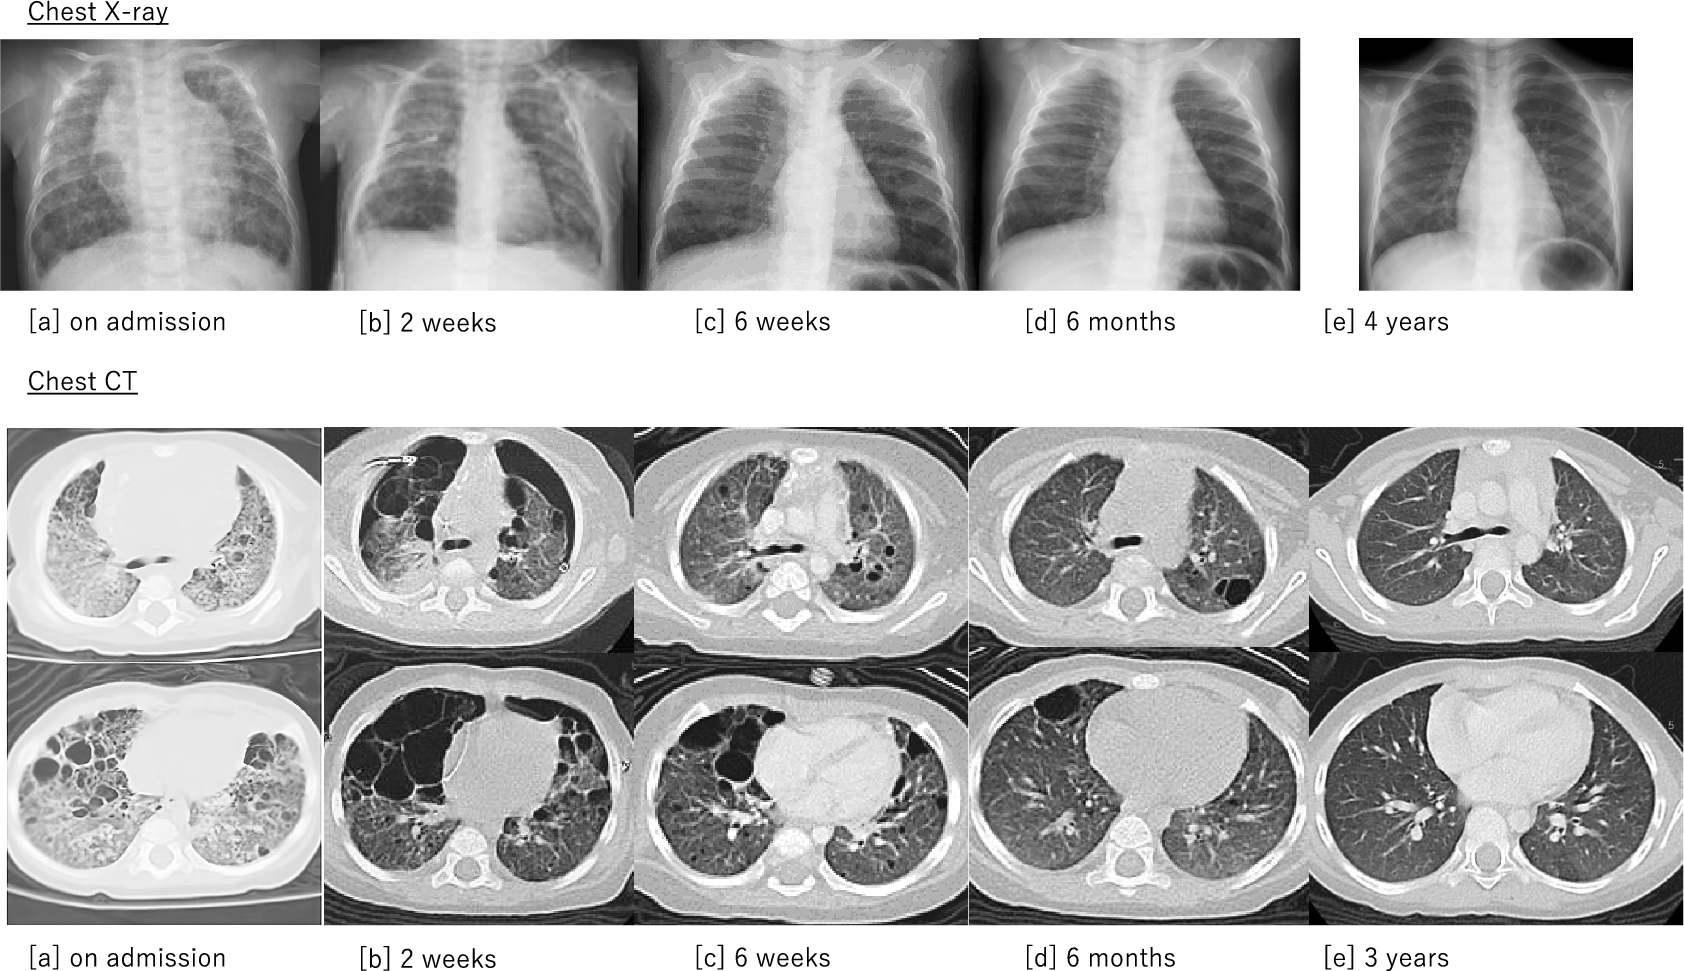 Honeycomb lung appearance accompanied by pediatric Langerhans cell histiocytosis: changes in imaging findings following chemotherapy